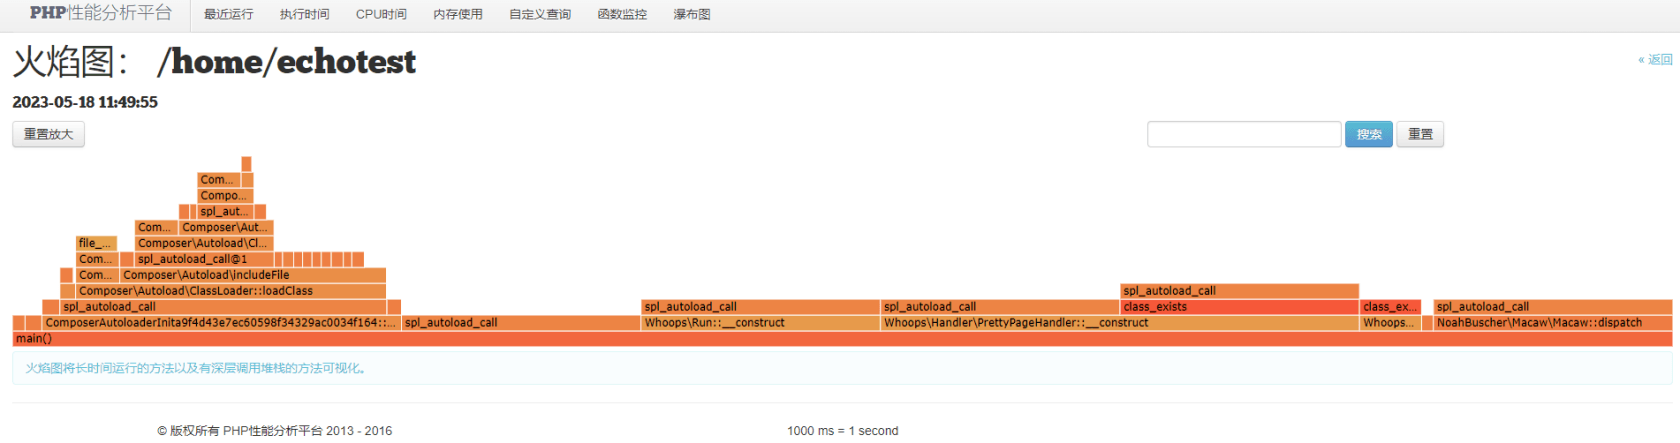 xhgui-chinese-View-flamegraph